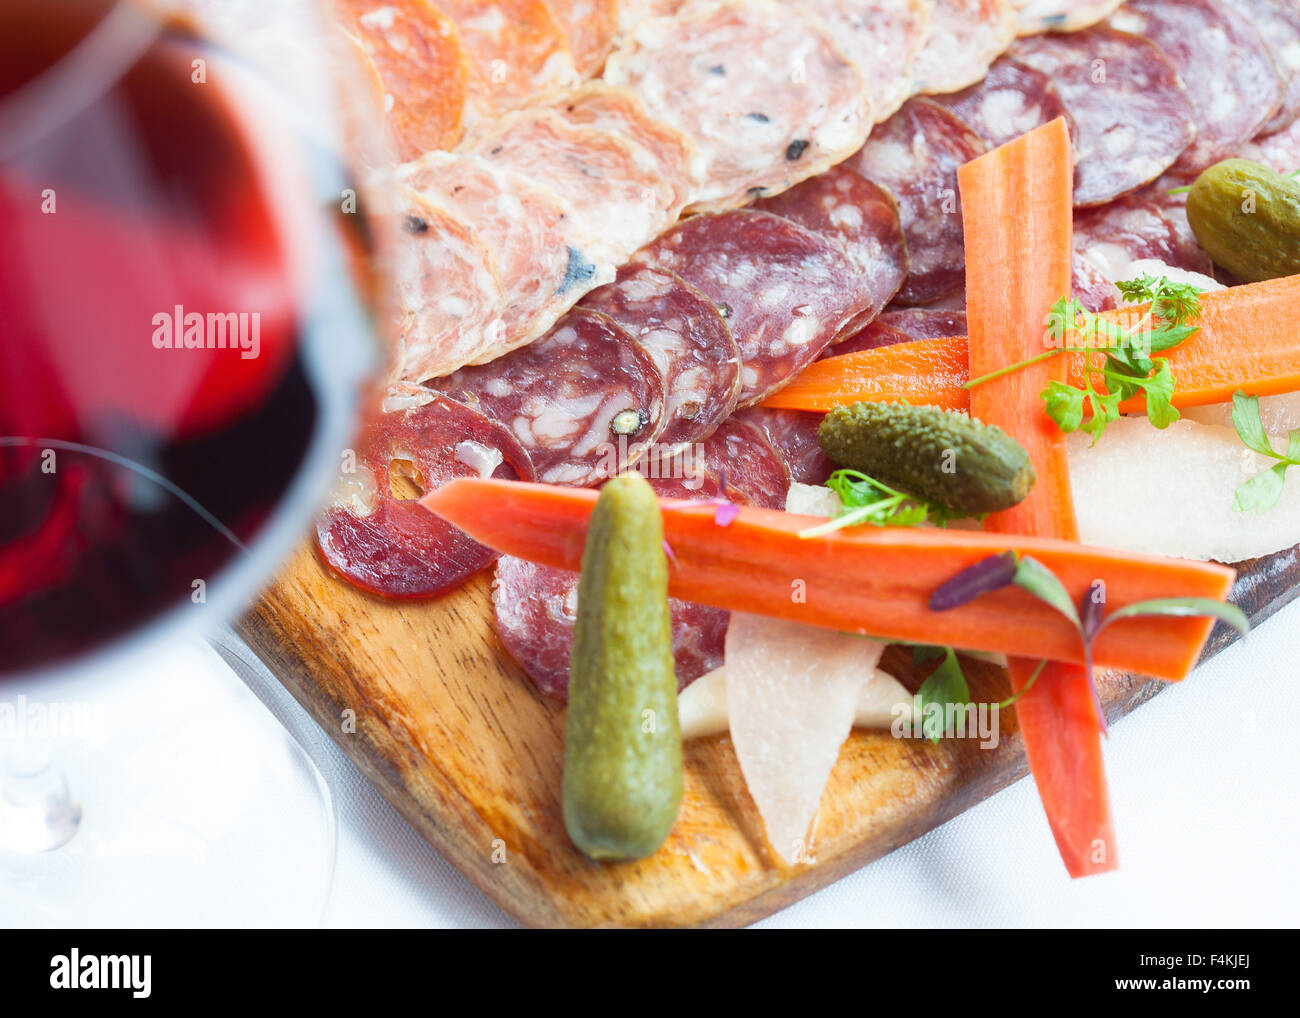 Close up of red wine and charcuterie board Stock Photo